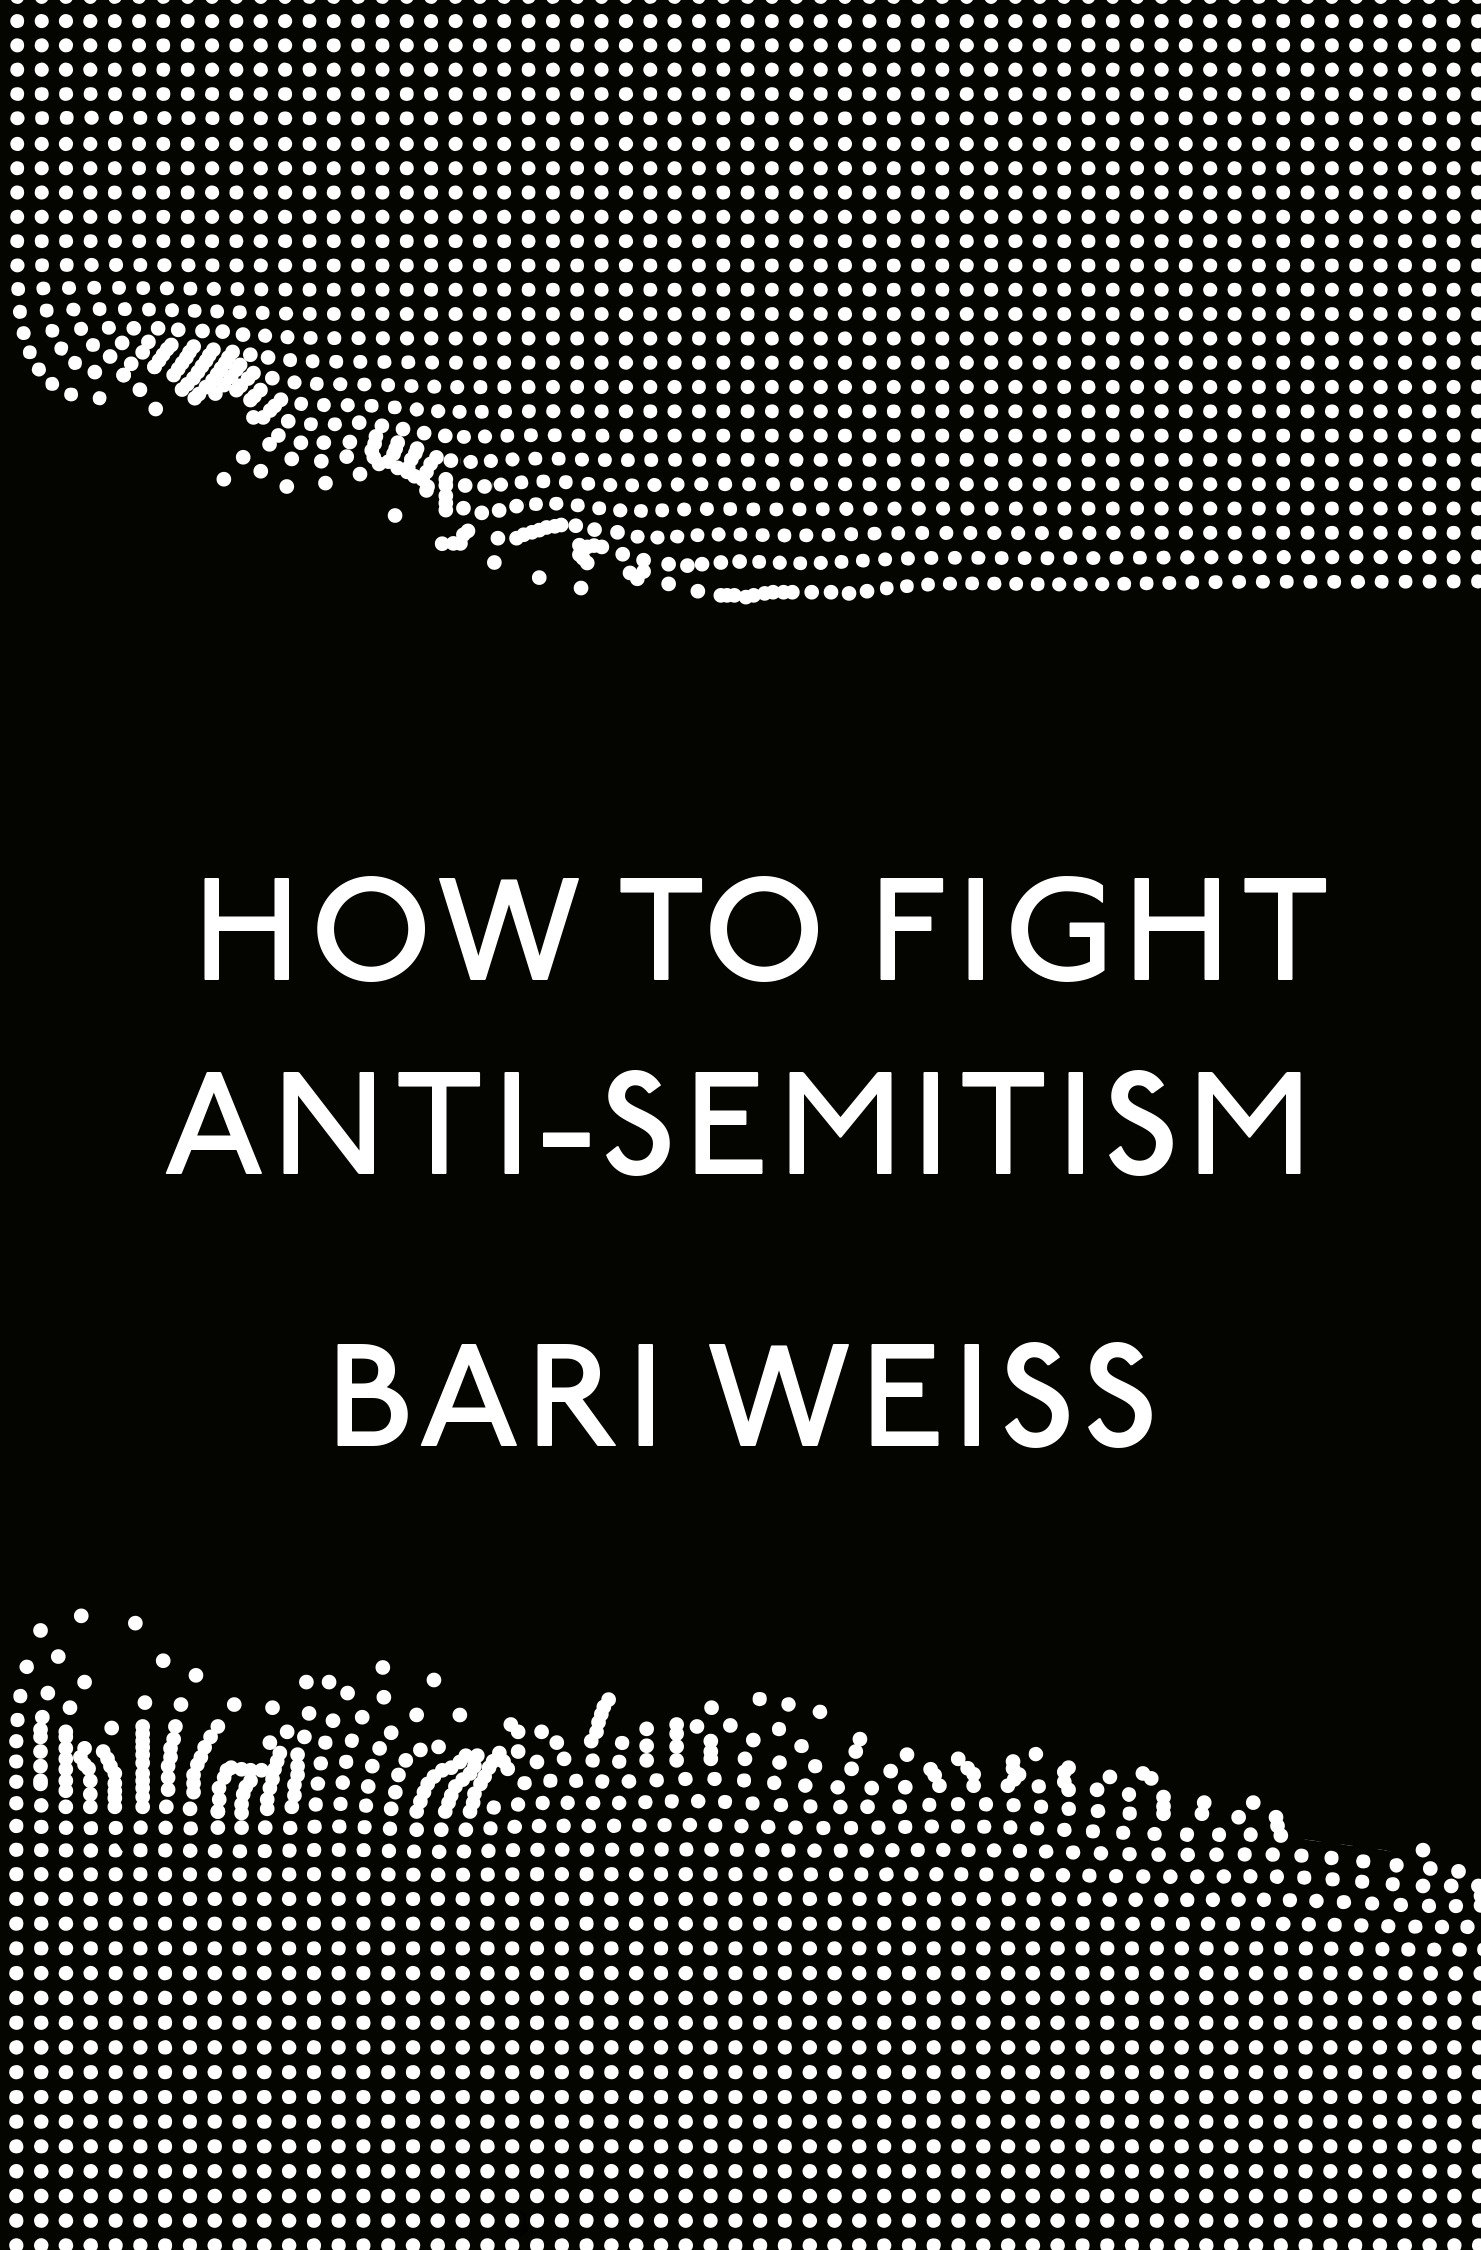 How To Fight Anti-Semitism (Hardcover Book)